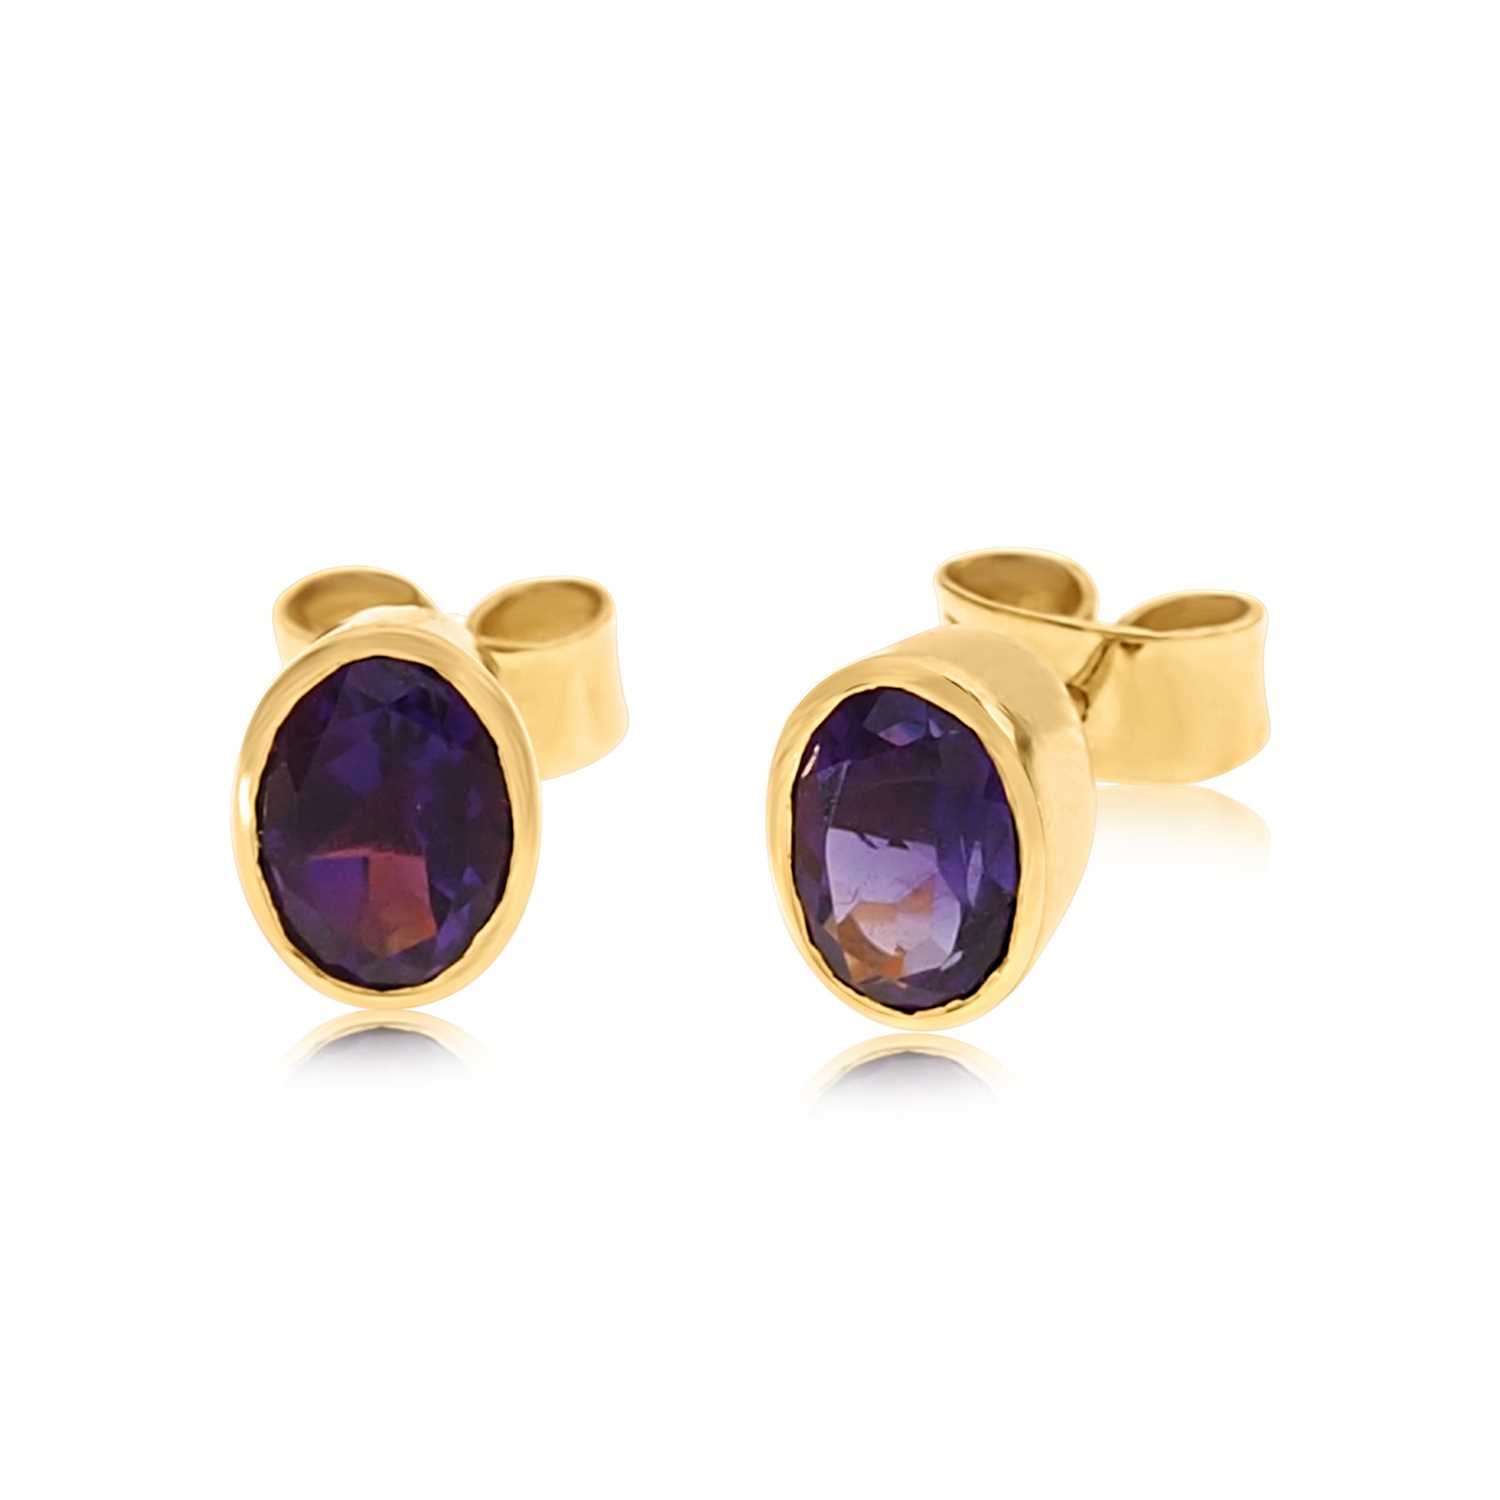 Lot 629 - Pair of 18K Gold Amethyst Solitaire Ear Studs